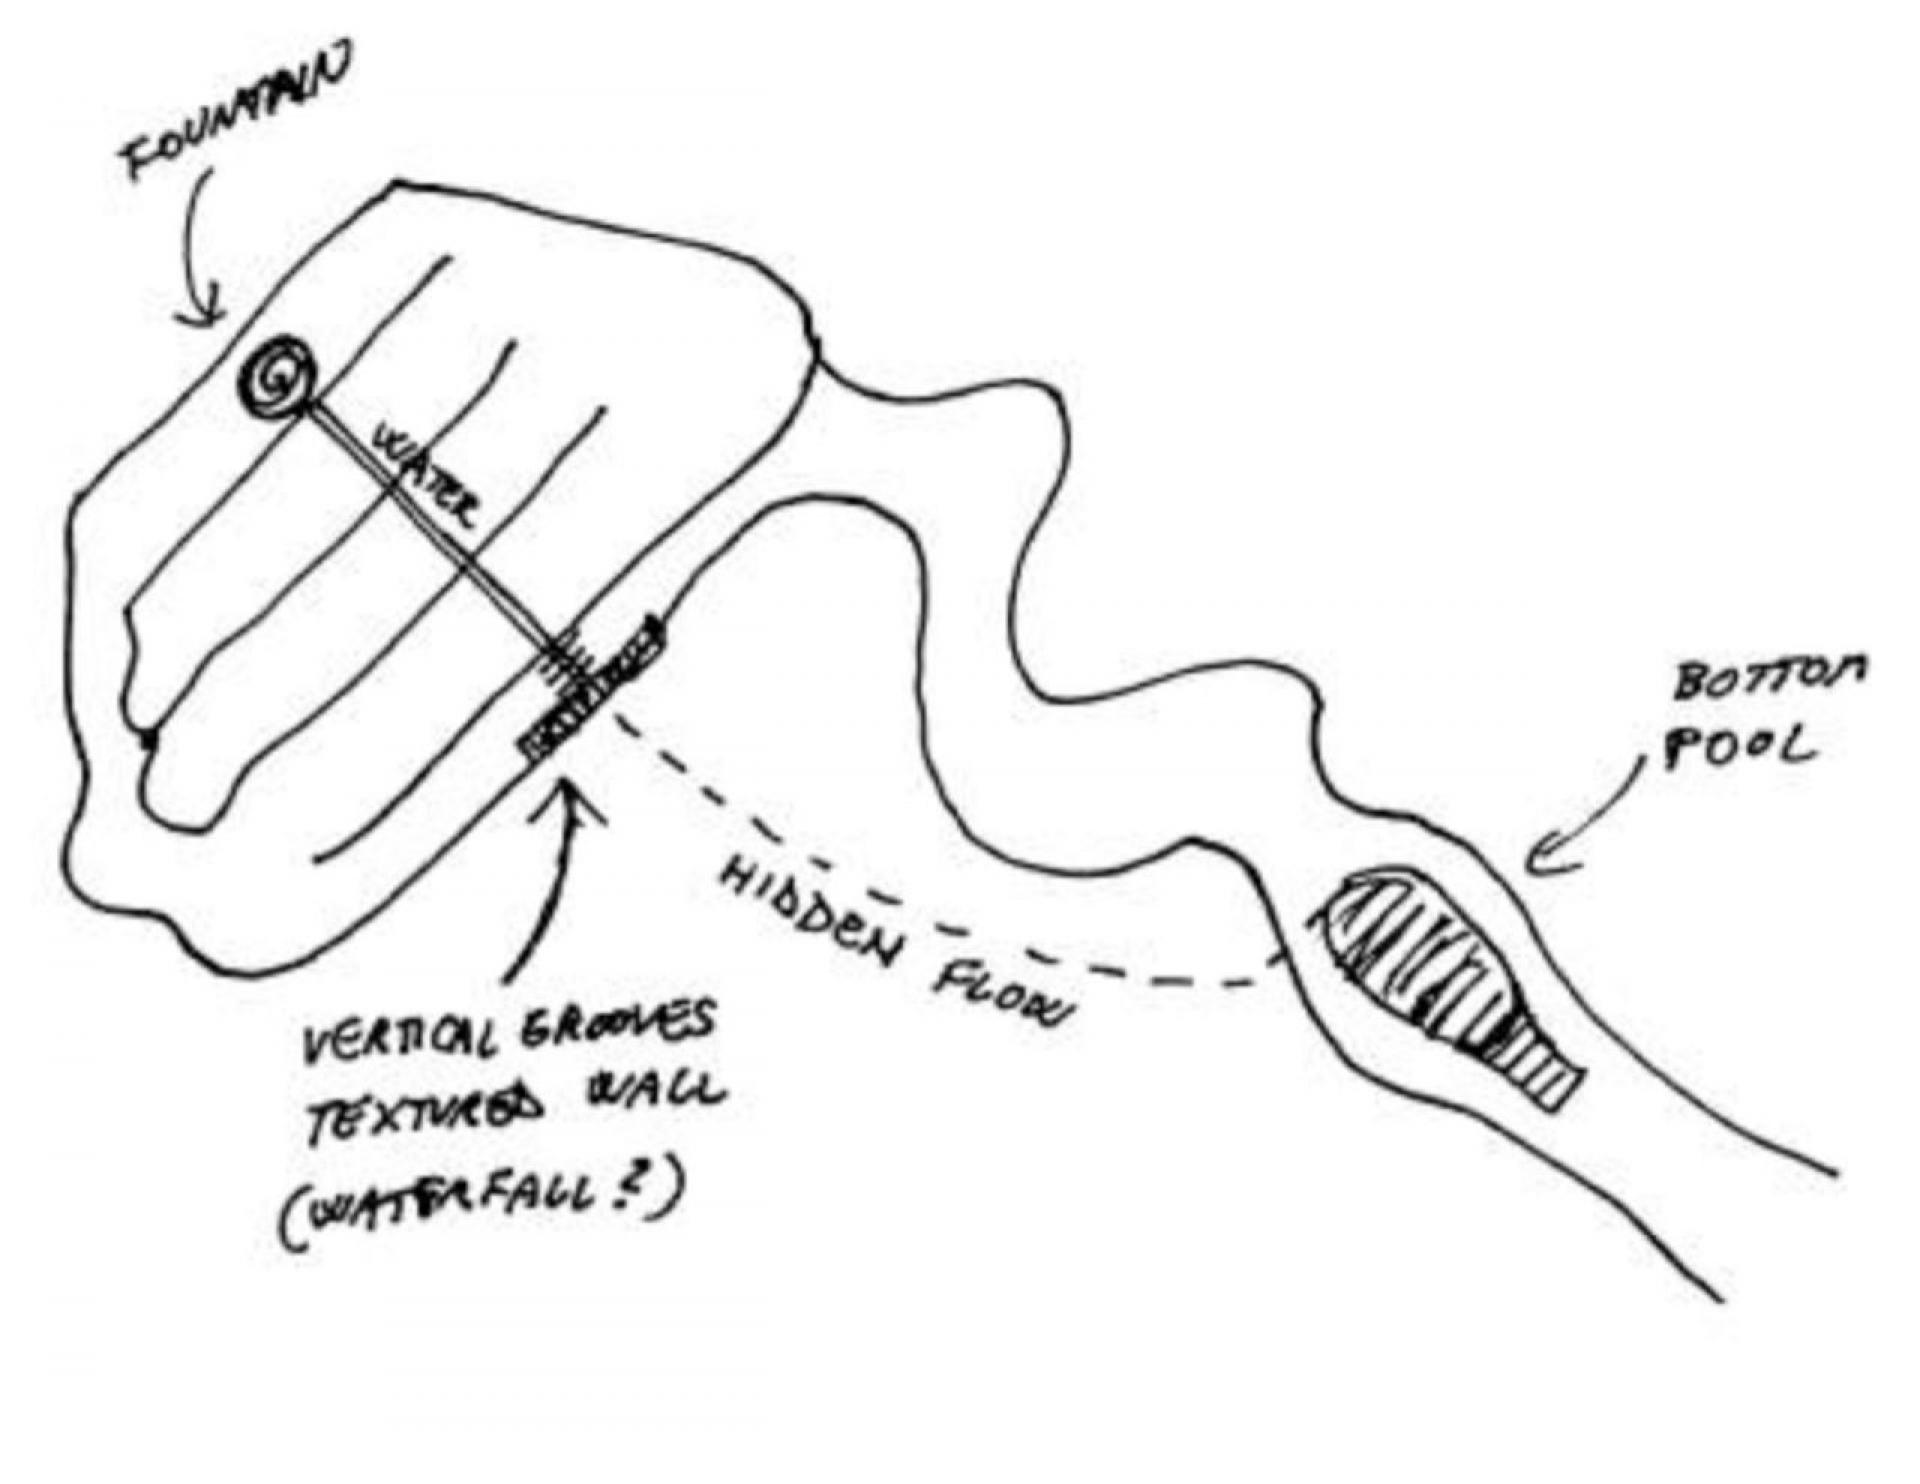 A sketch showing the path of the water flow.